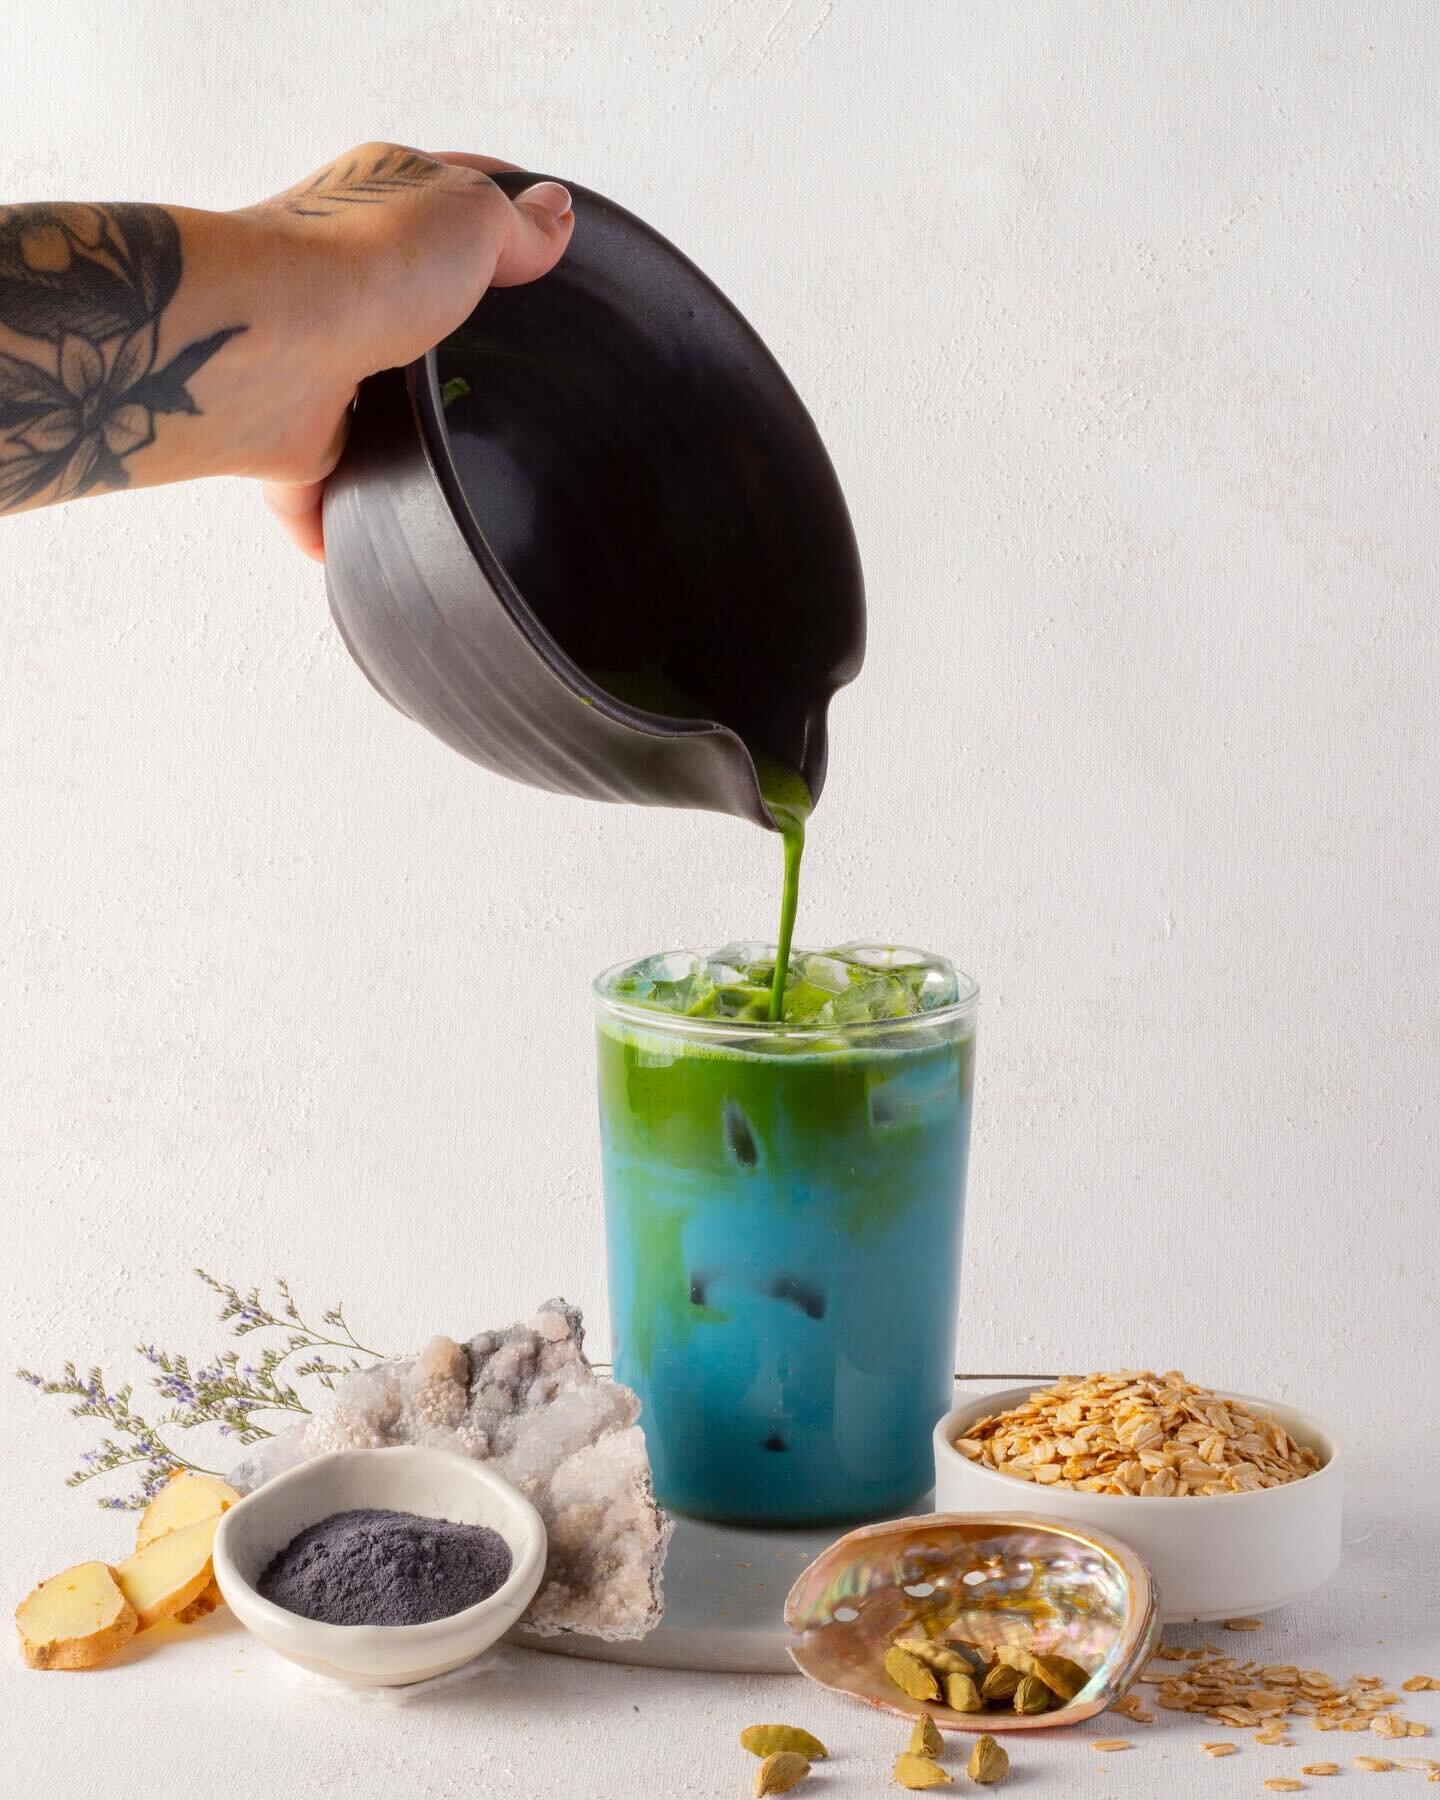 🦋💙🍵 Iced Blue Moon Ginger Majik w Matcha 🍵💙🦋

If you&rsquo;re looking to add a little extra sustainable energy and antioxidants into your day we HIGHLY recommend adding matcha to some of our decaffeinated beverages like the Blue Moon Ginger Maj